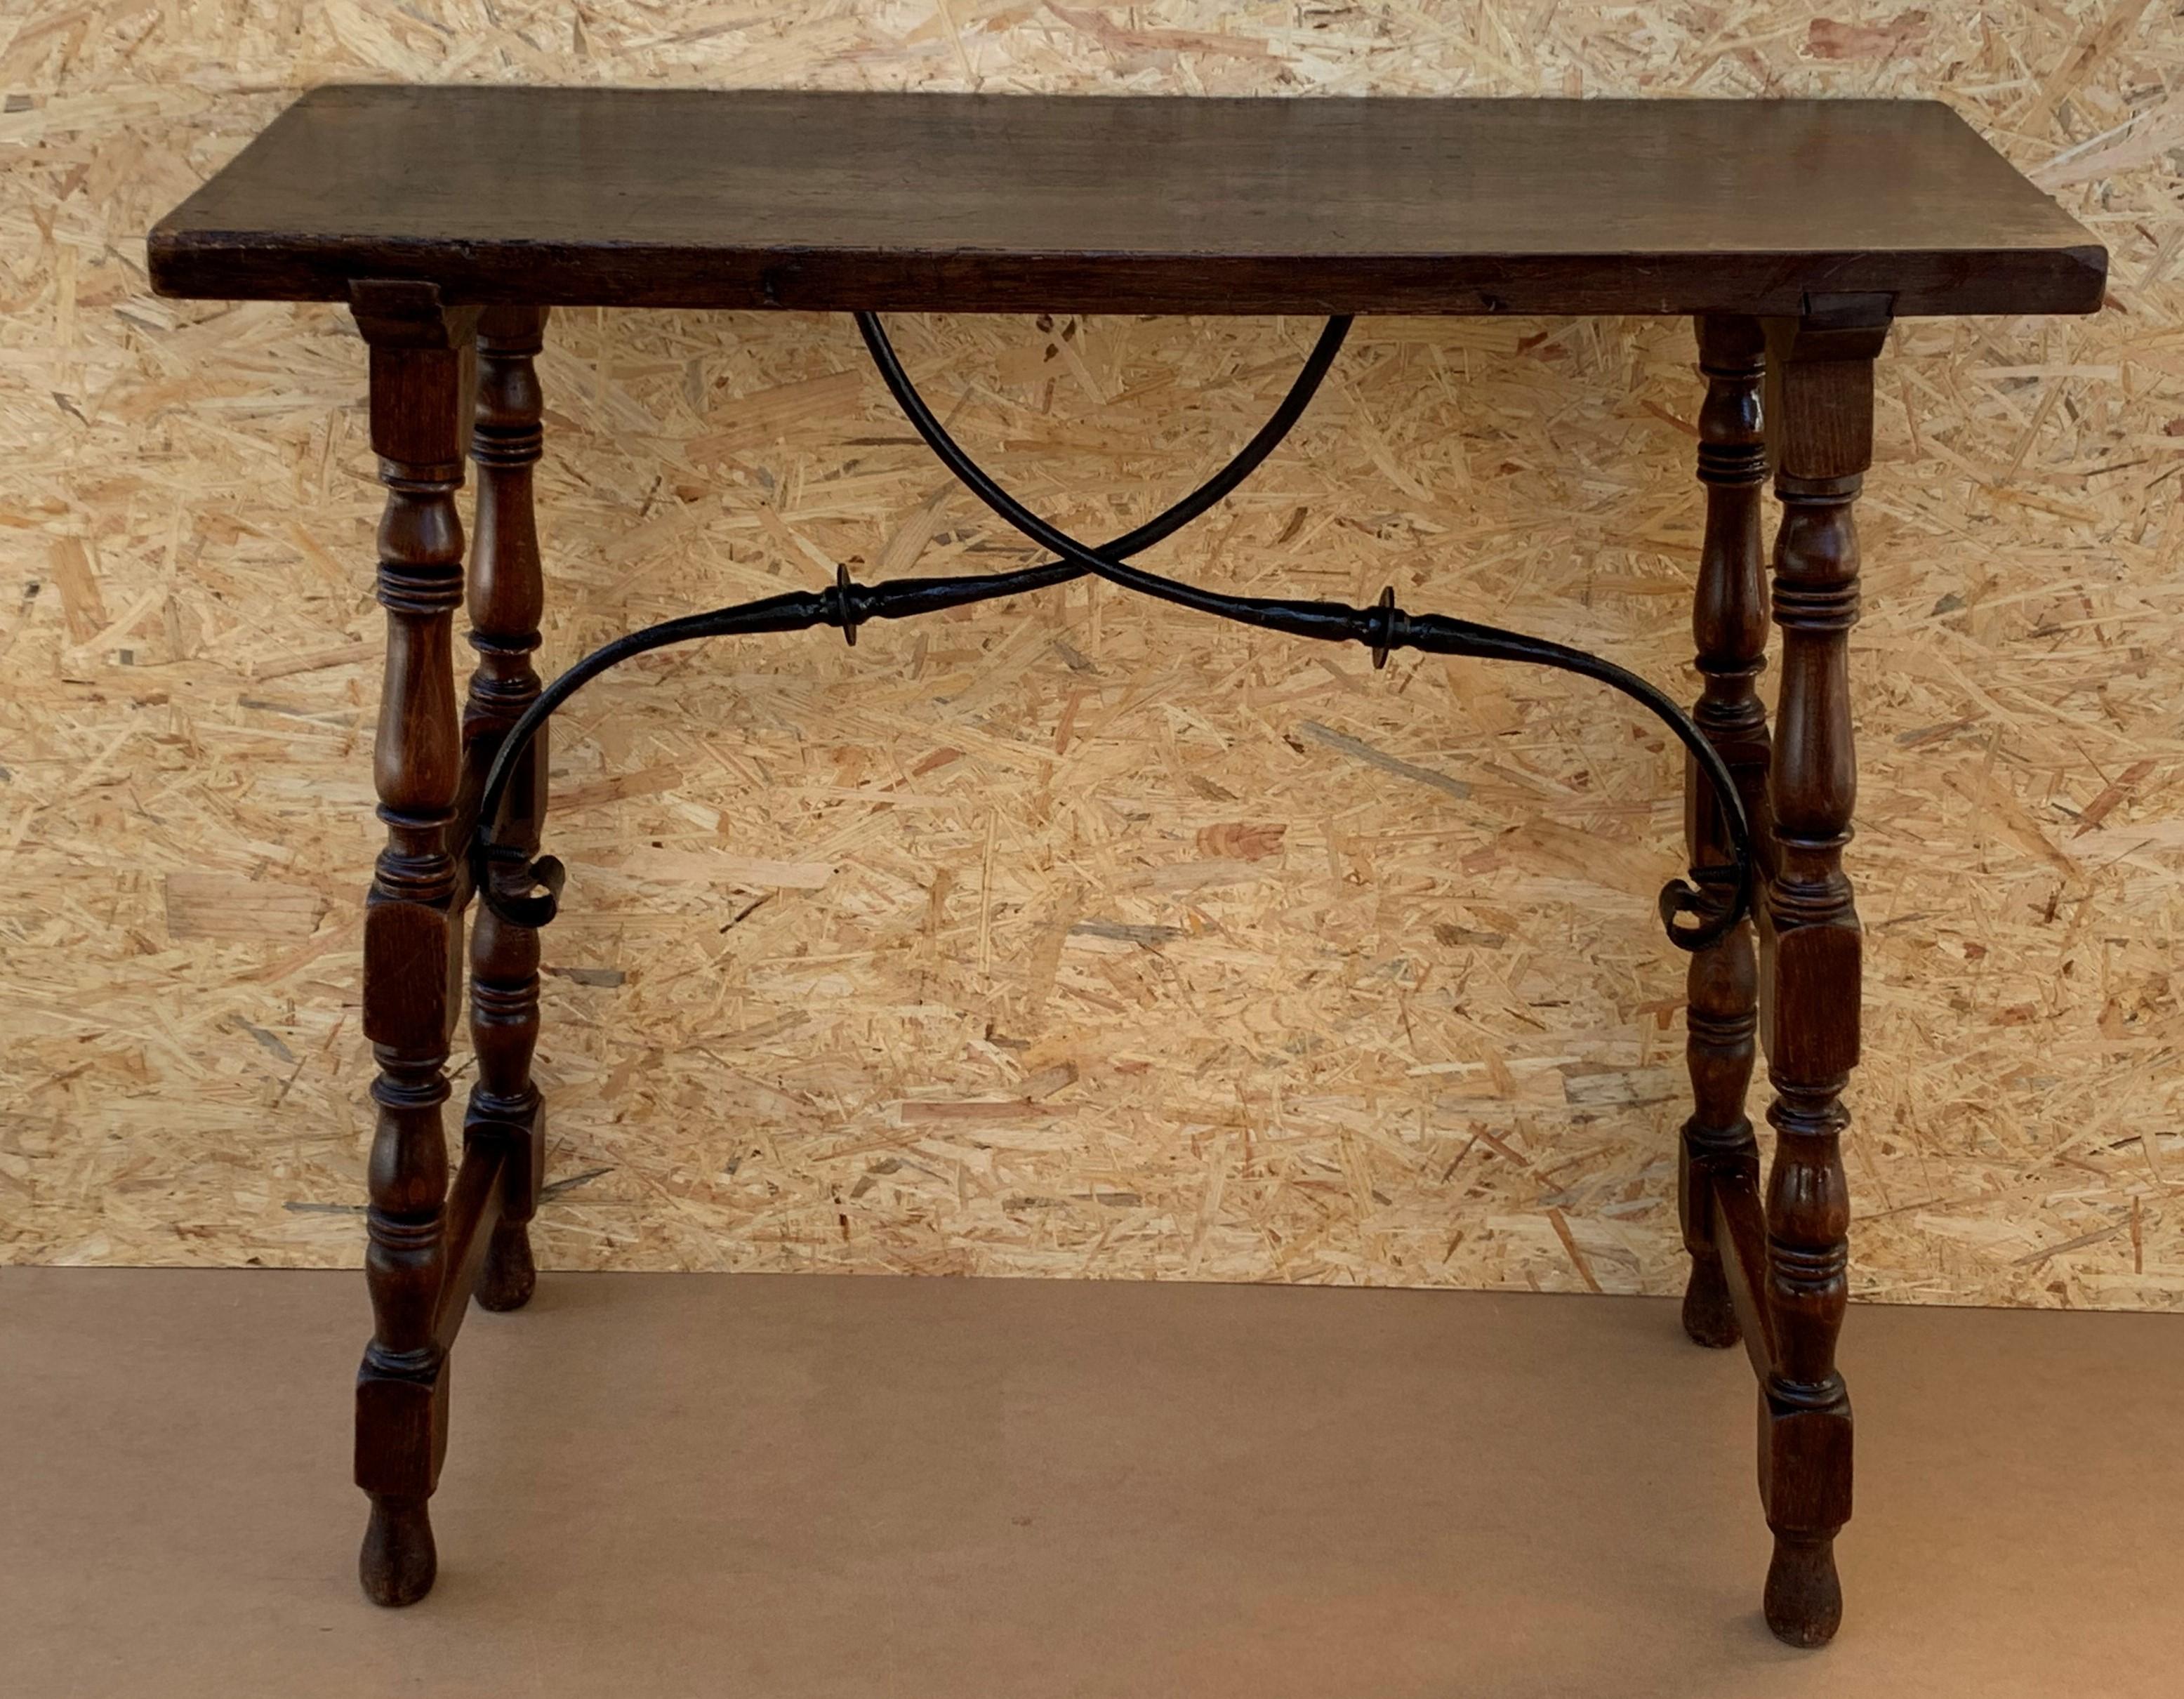 19th Century Spanish Console Table with Iron Stretcher and Shaped Legs, Side Table, Baroque